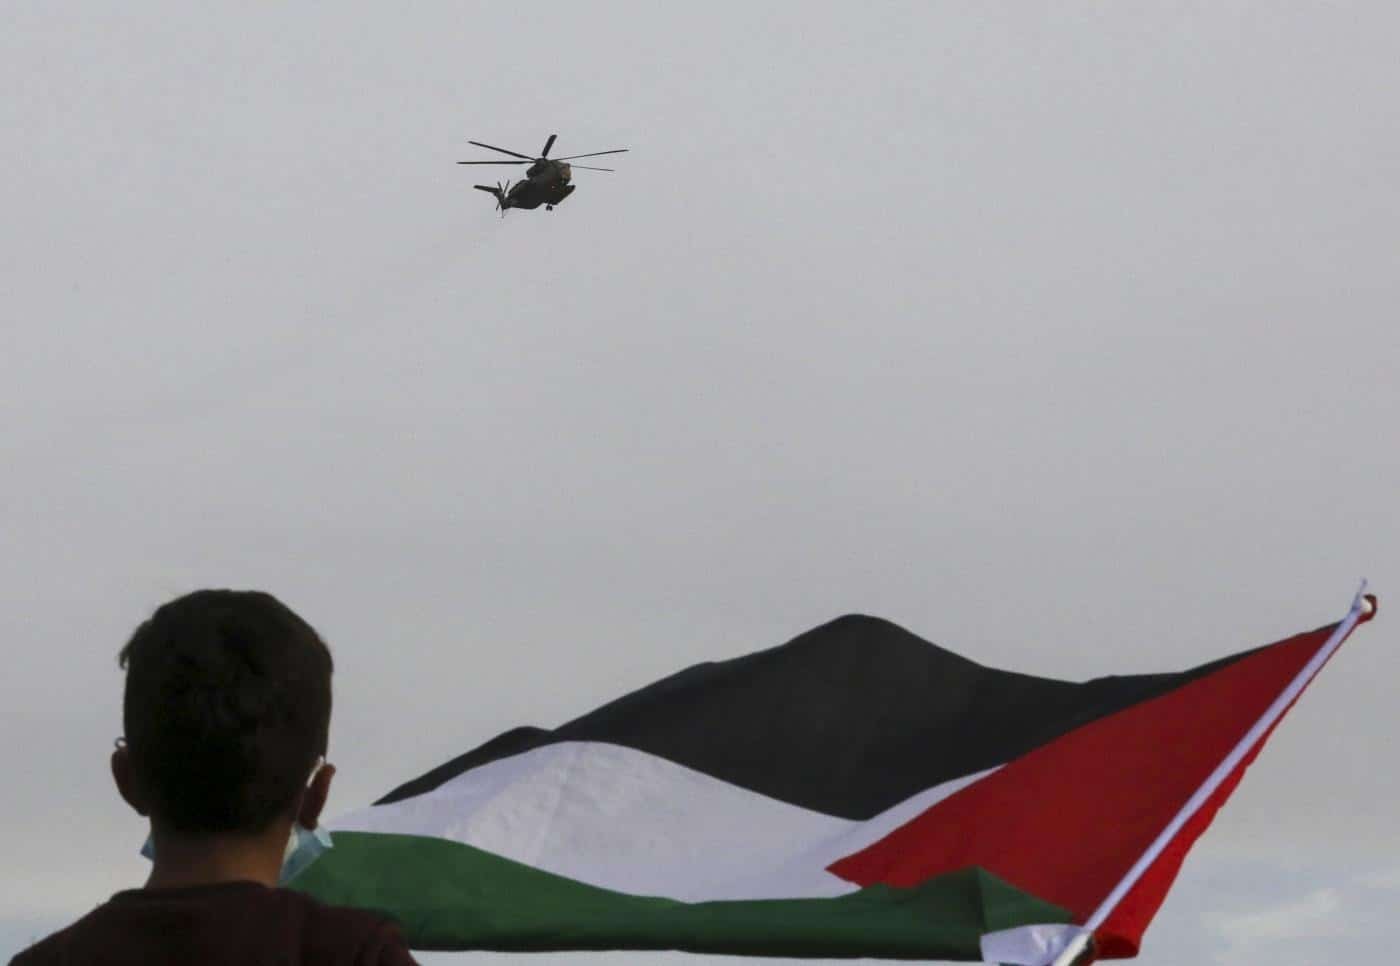 A Palestinian man waves a Palestinian flag as he watches a helicopter over head.